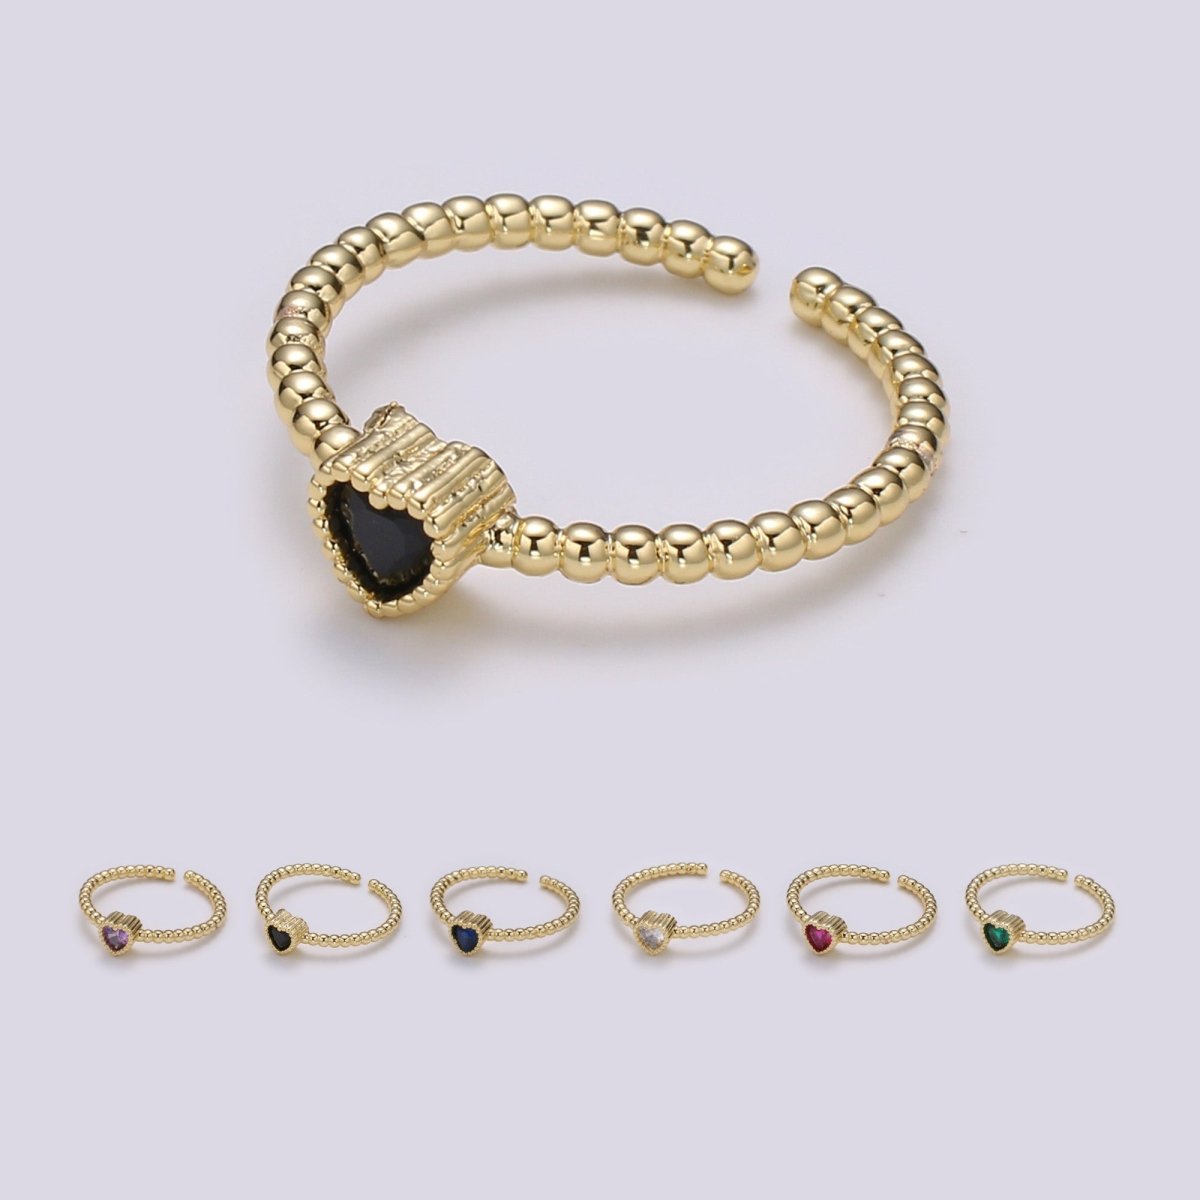 Gold Bead ring, Gold stacking ring, Dainty ring, thick gold ring, gold ring, bead ring, Heart Cz ring, gold stacking ring, beaded ring - DLUXCA